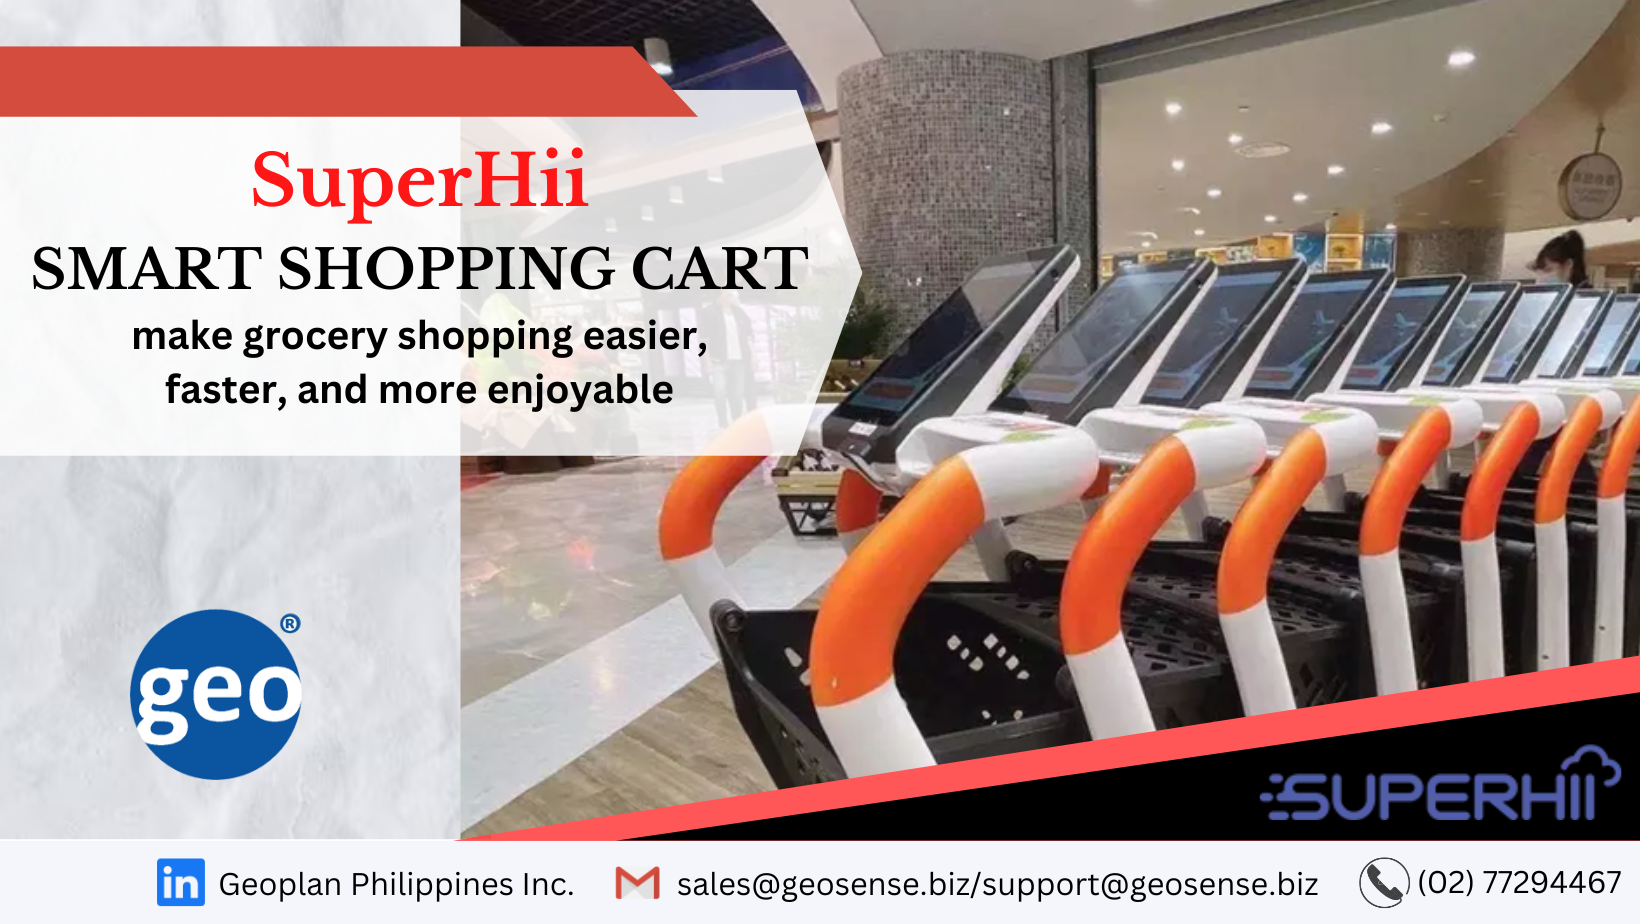 SuperHii: Smart Shopping Cart for the easier, faster, and more enjoyable grocery shopping experience.